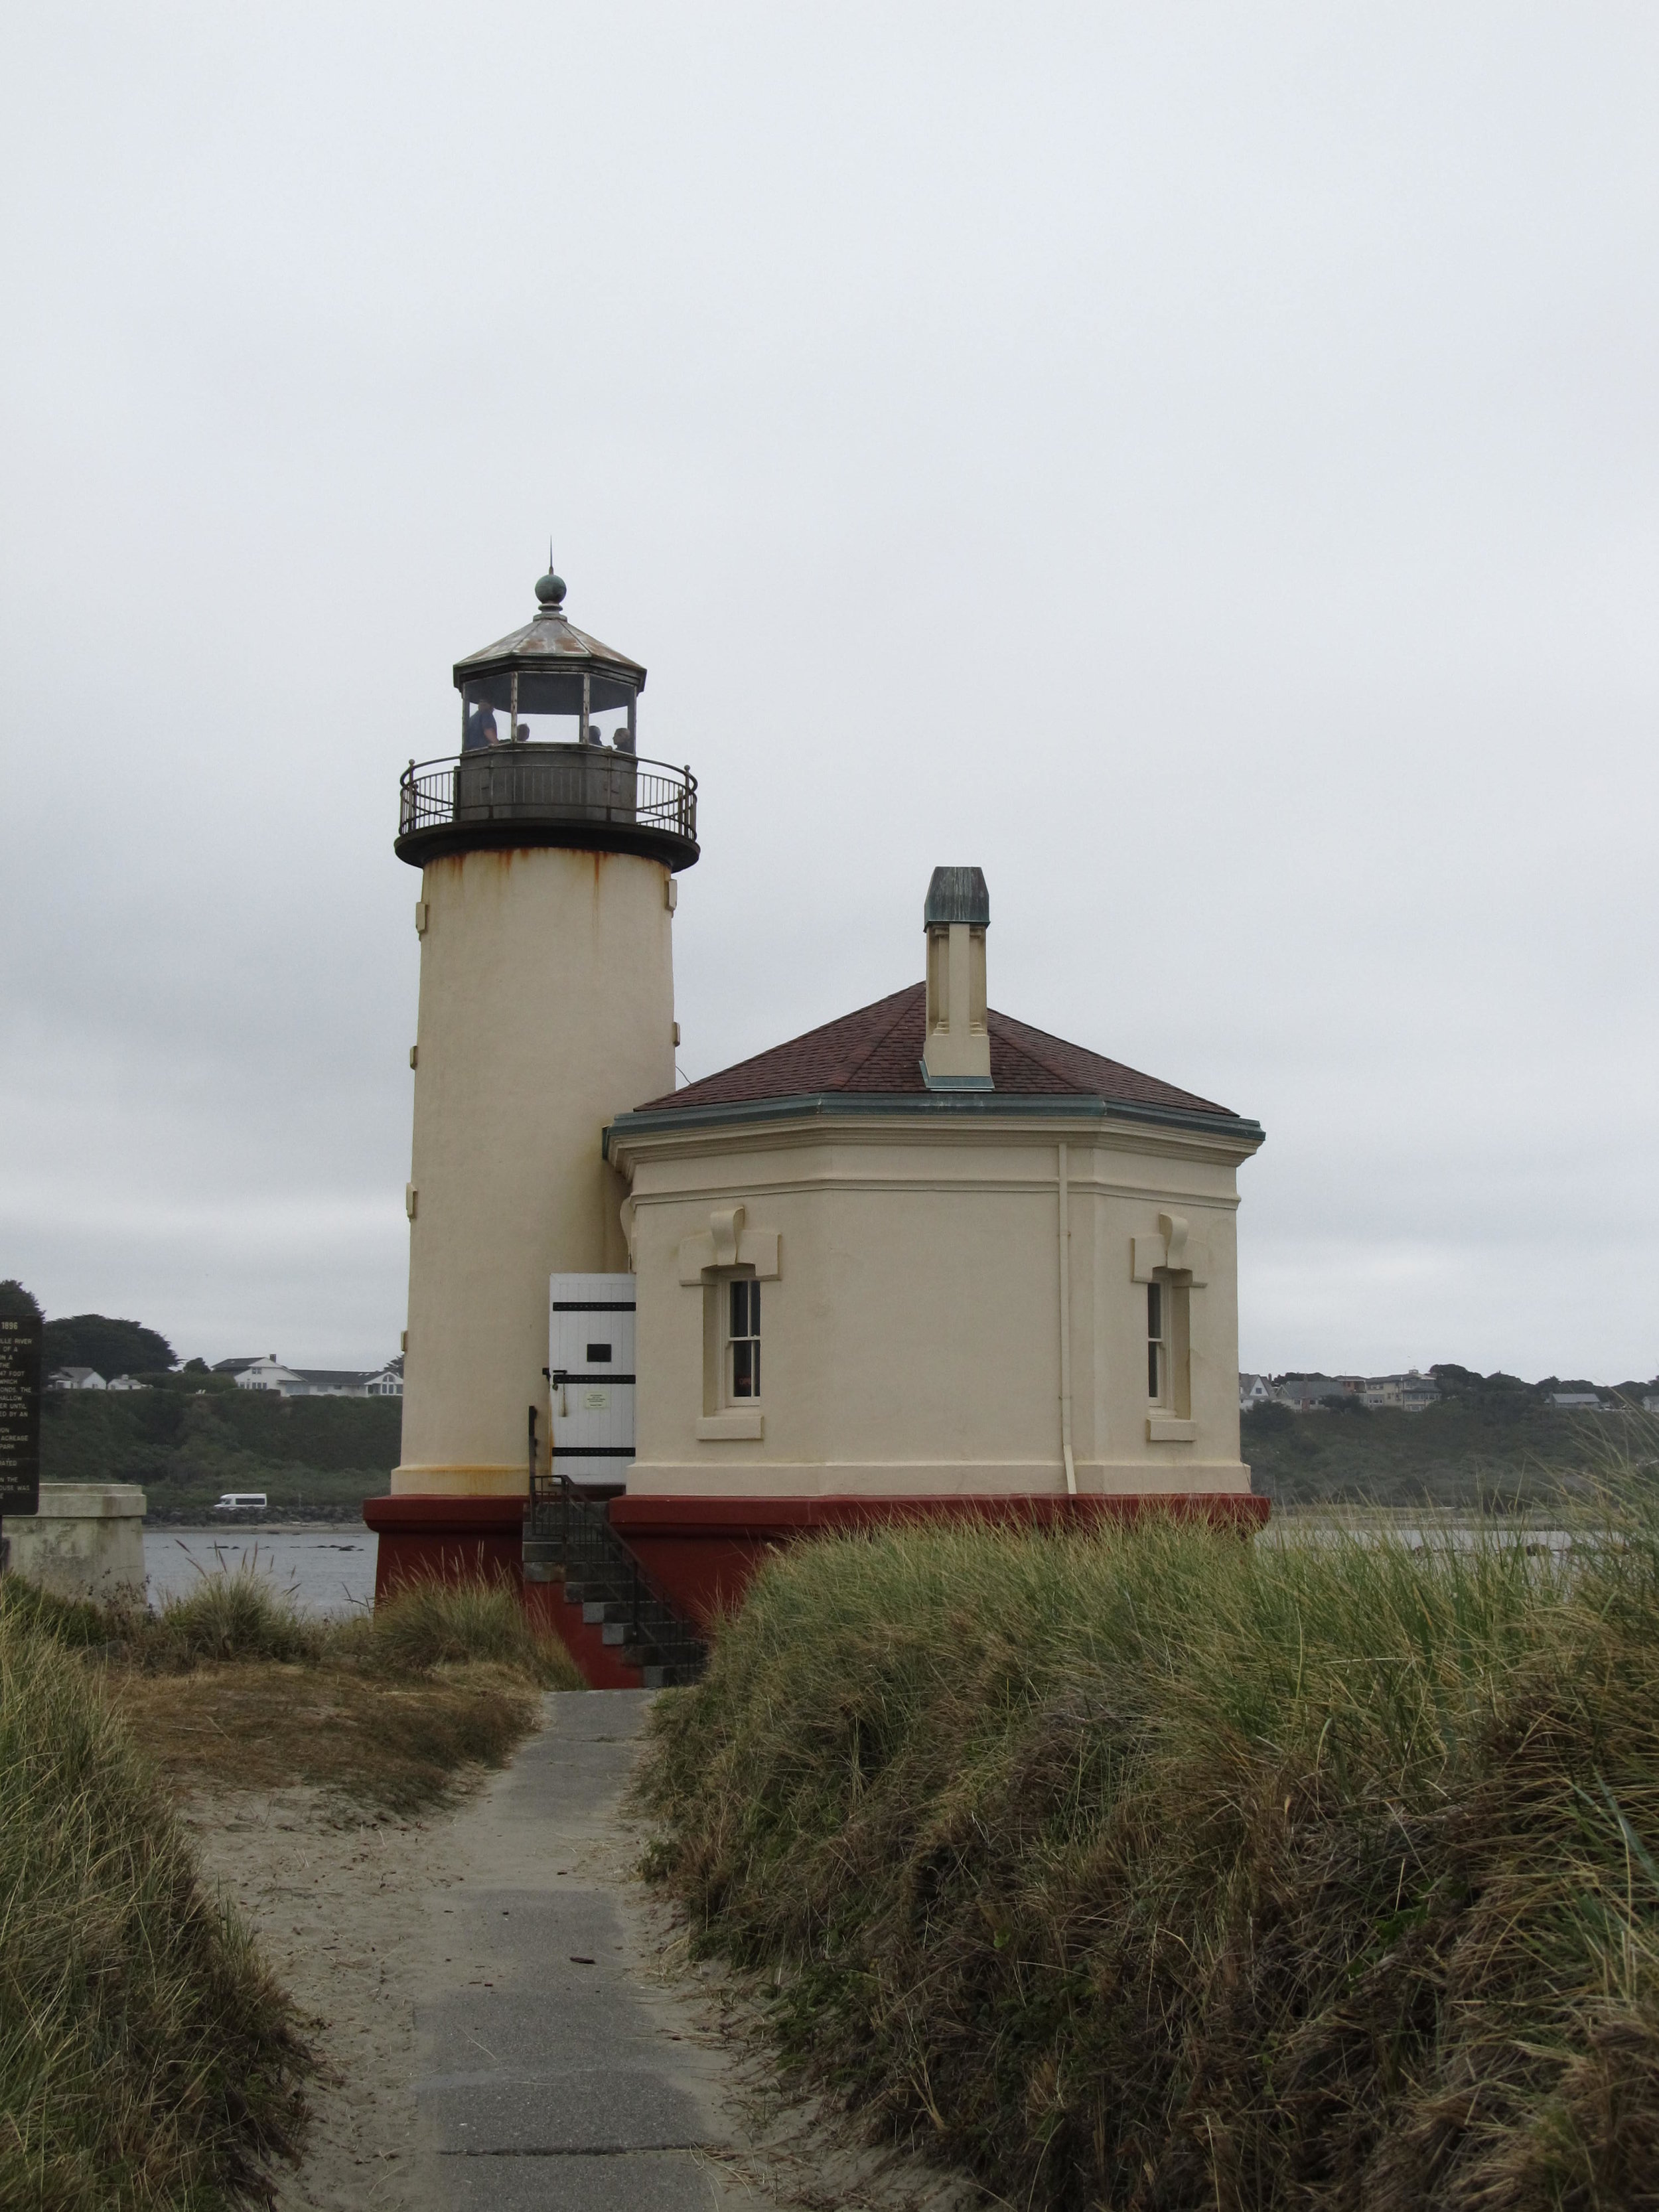 BULLARDS BEACH - Bandon Oregon - What to do in Southern  Oregon - Things to do 